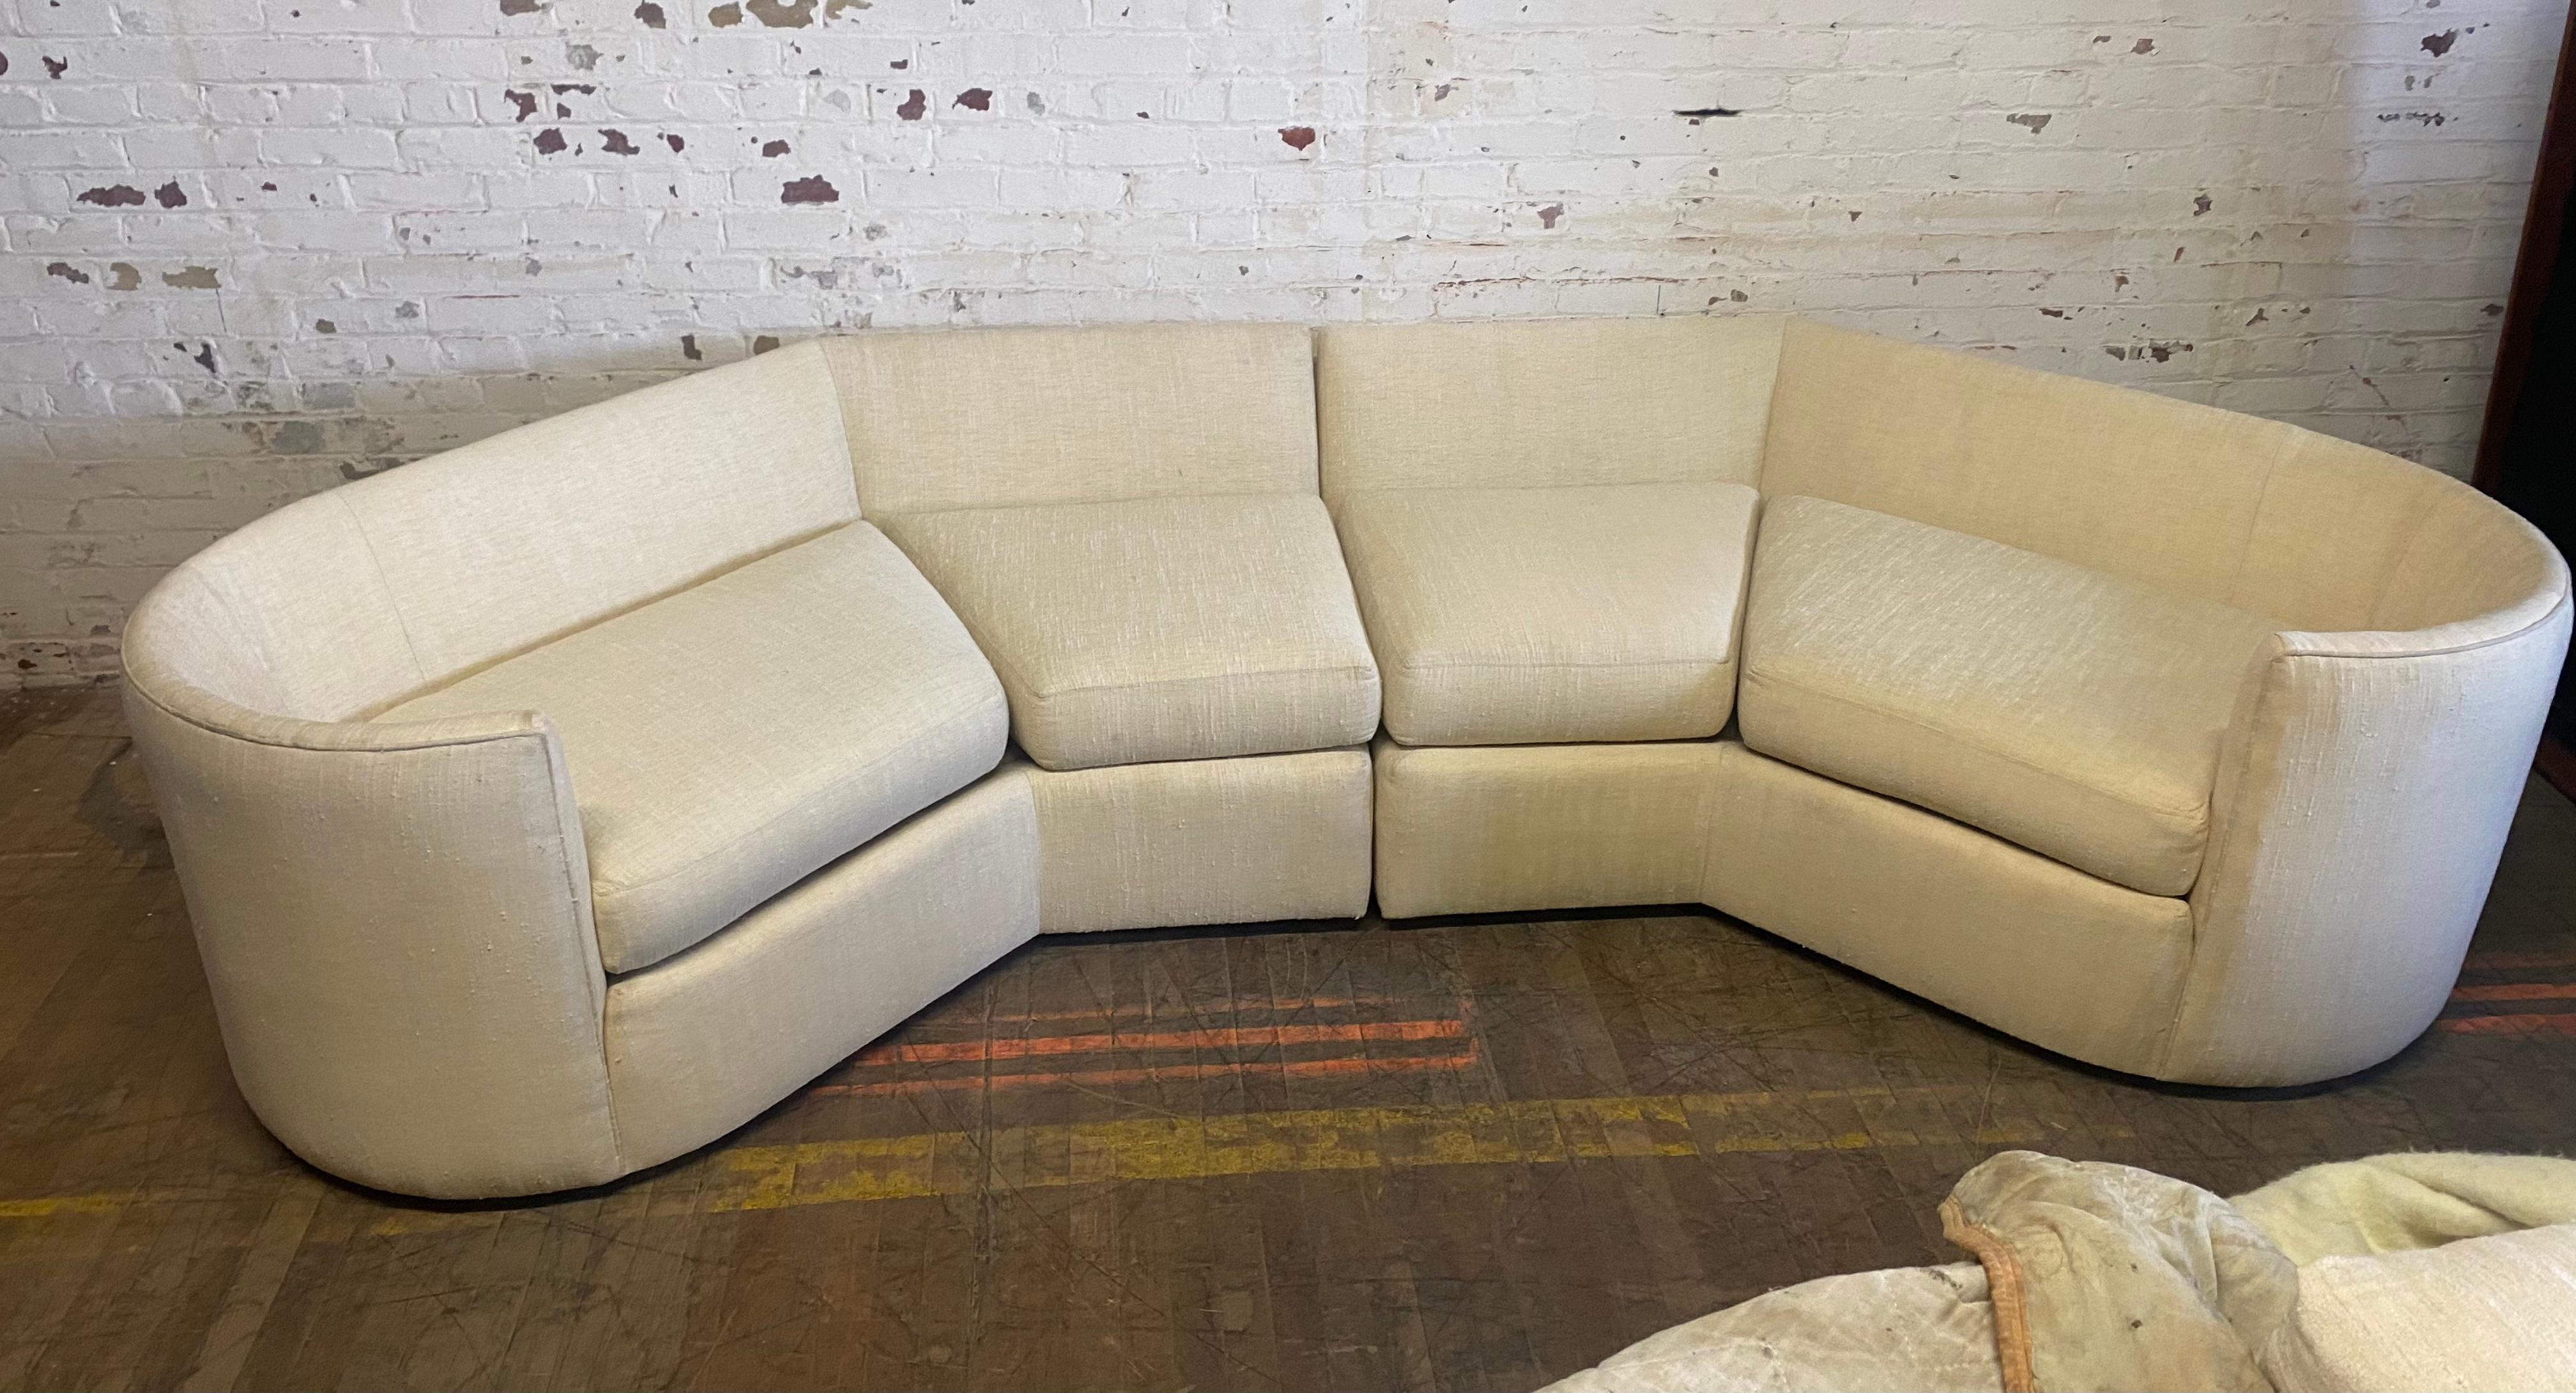 Stunning two piece sofa, Post Modernist design, Very reminiscent of designs by Vladimir Kagan, Milo Baughman, Noguchi etc, Extremely comfortable. Nice original condition, Coould use a good cleaning, Would be amazing reupholstered, Hand delivery